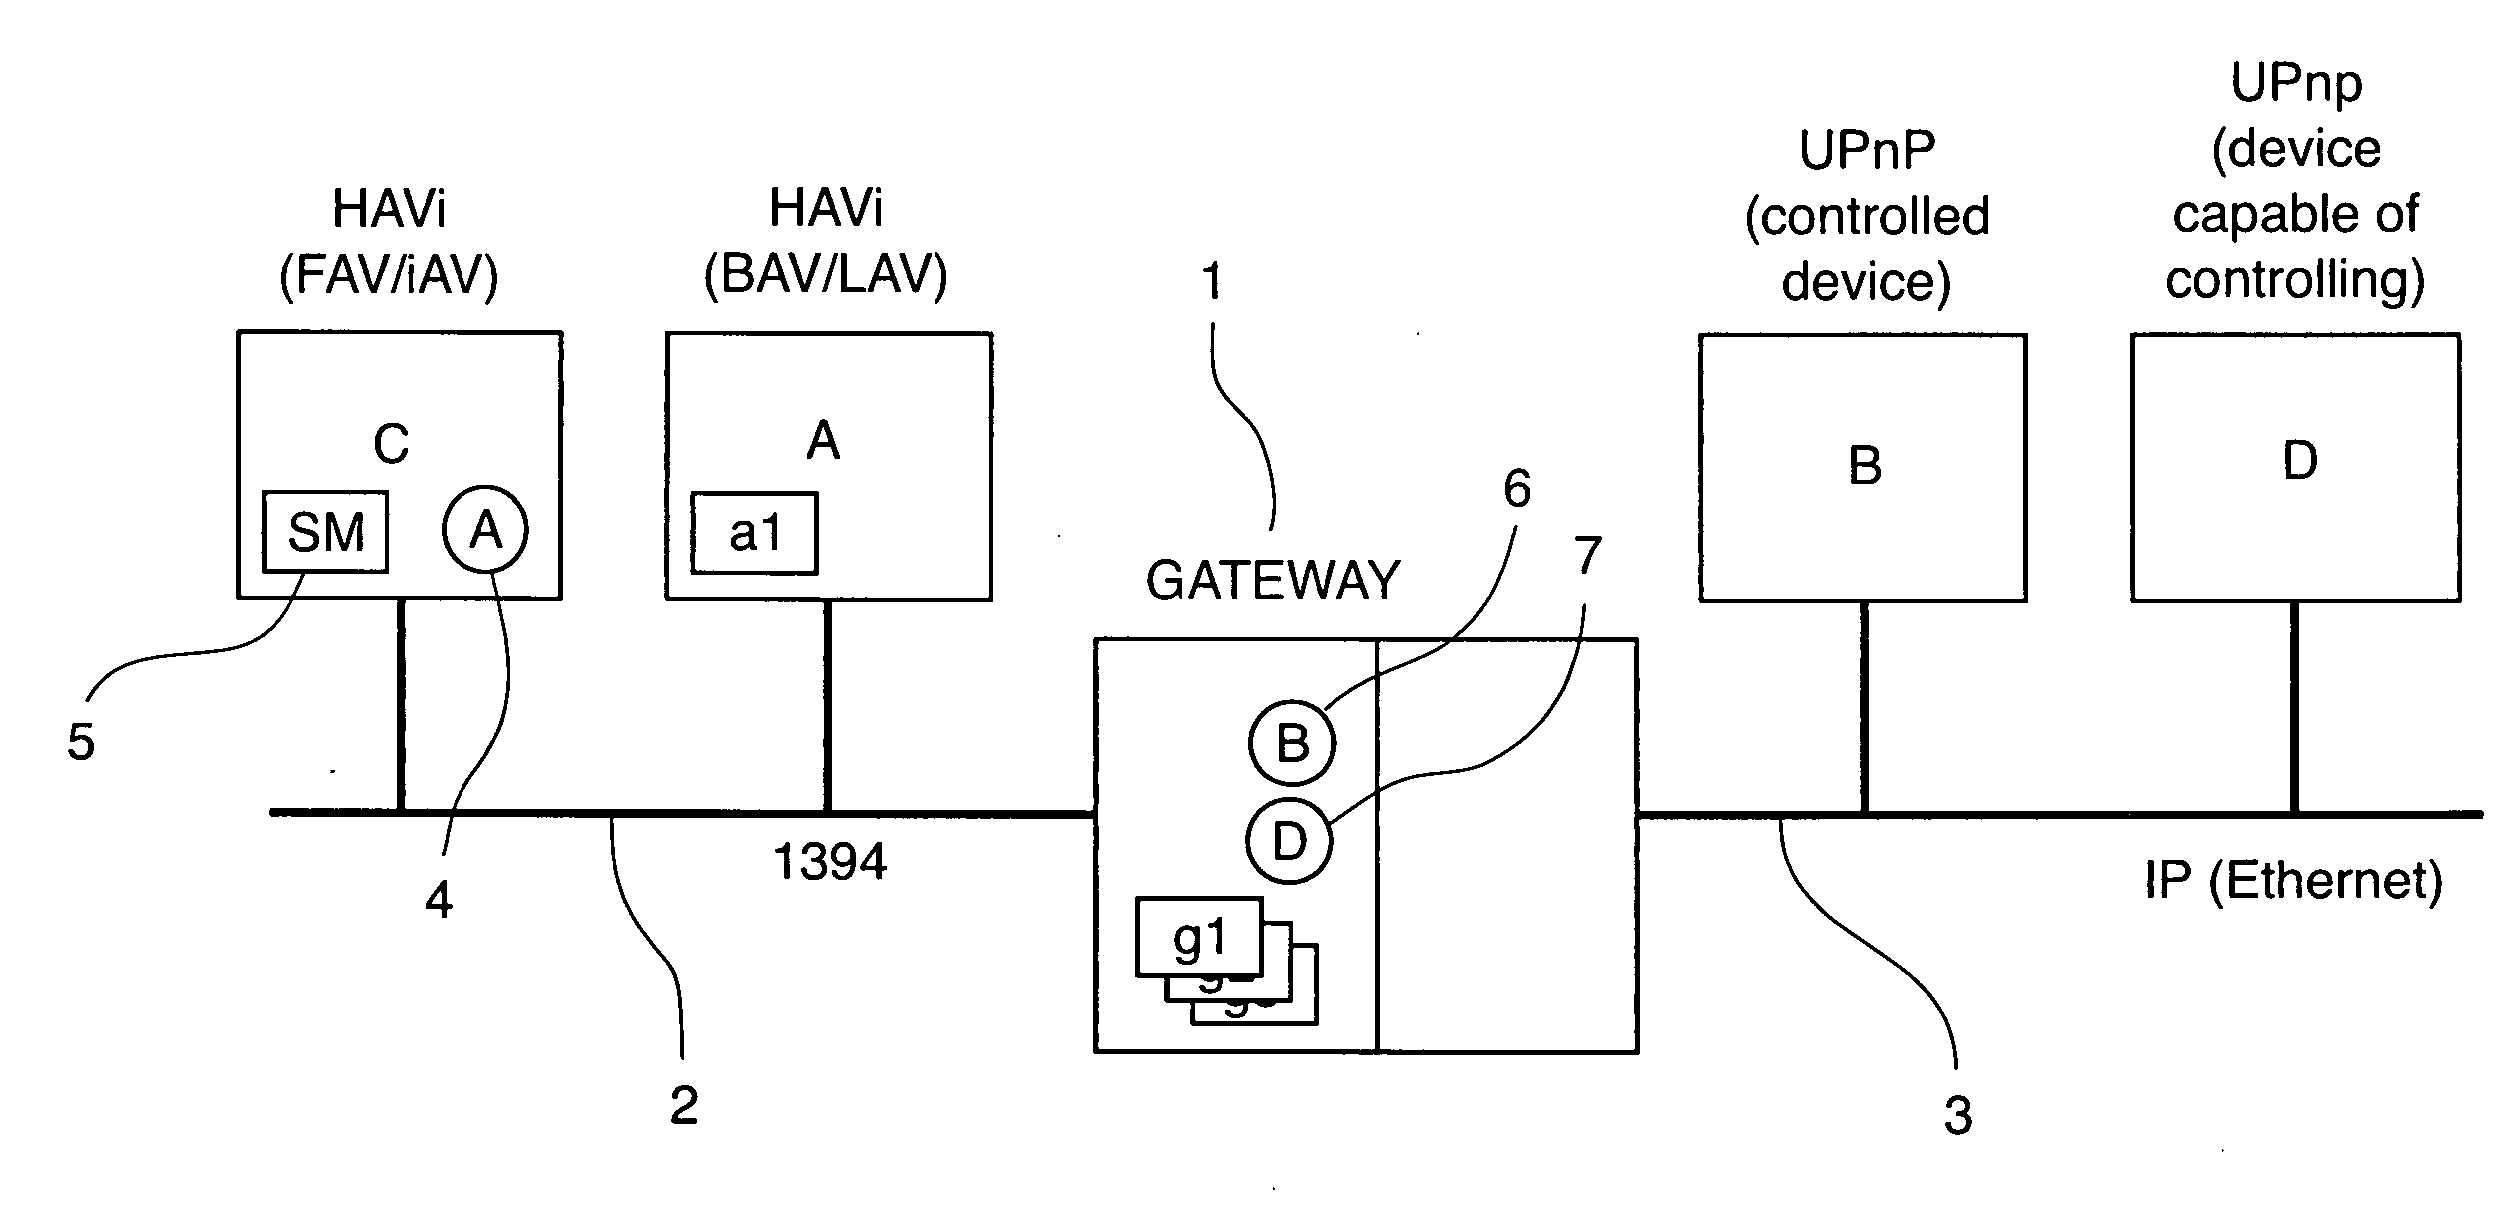 Gateway and method for the interconnection of two networks, especially a HAVi network and an UPnP network